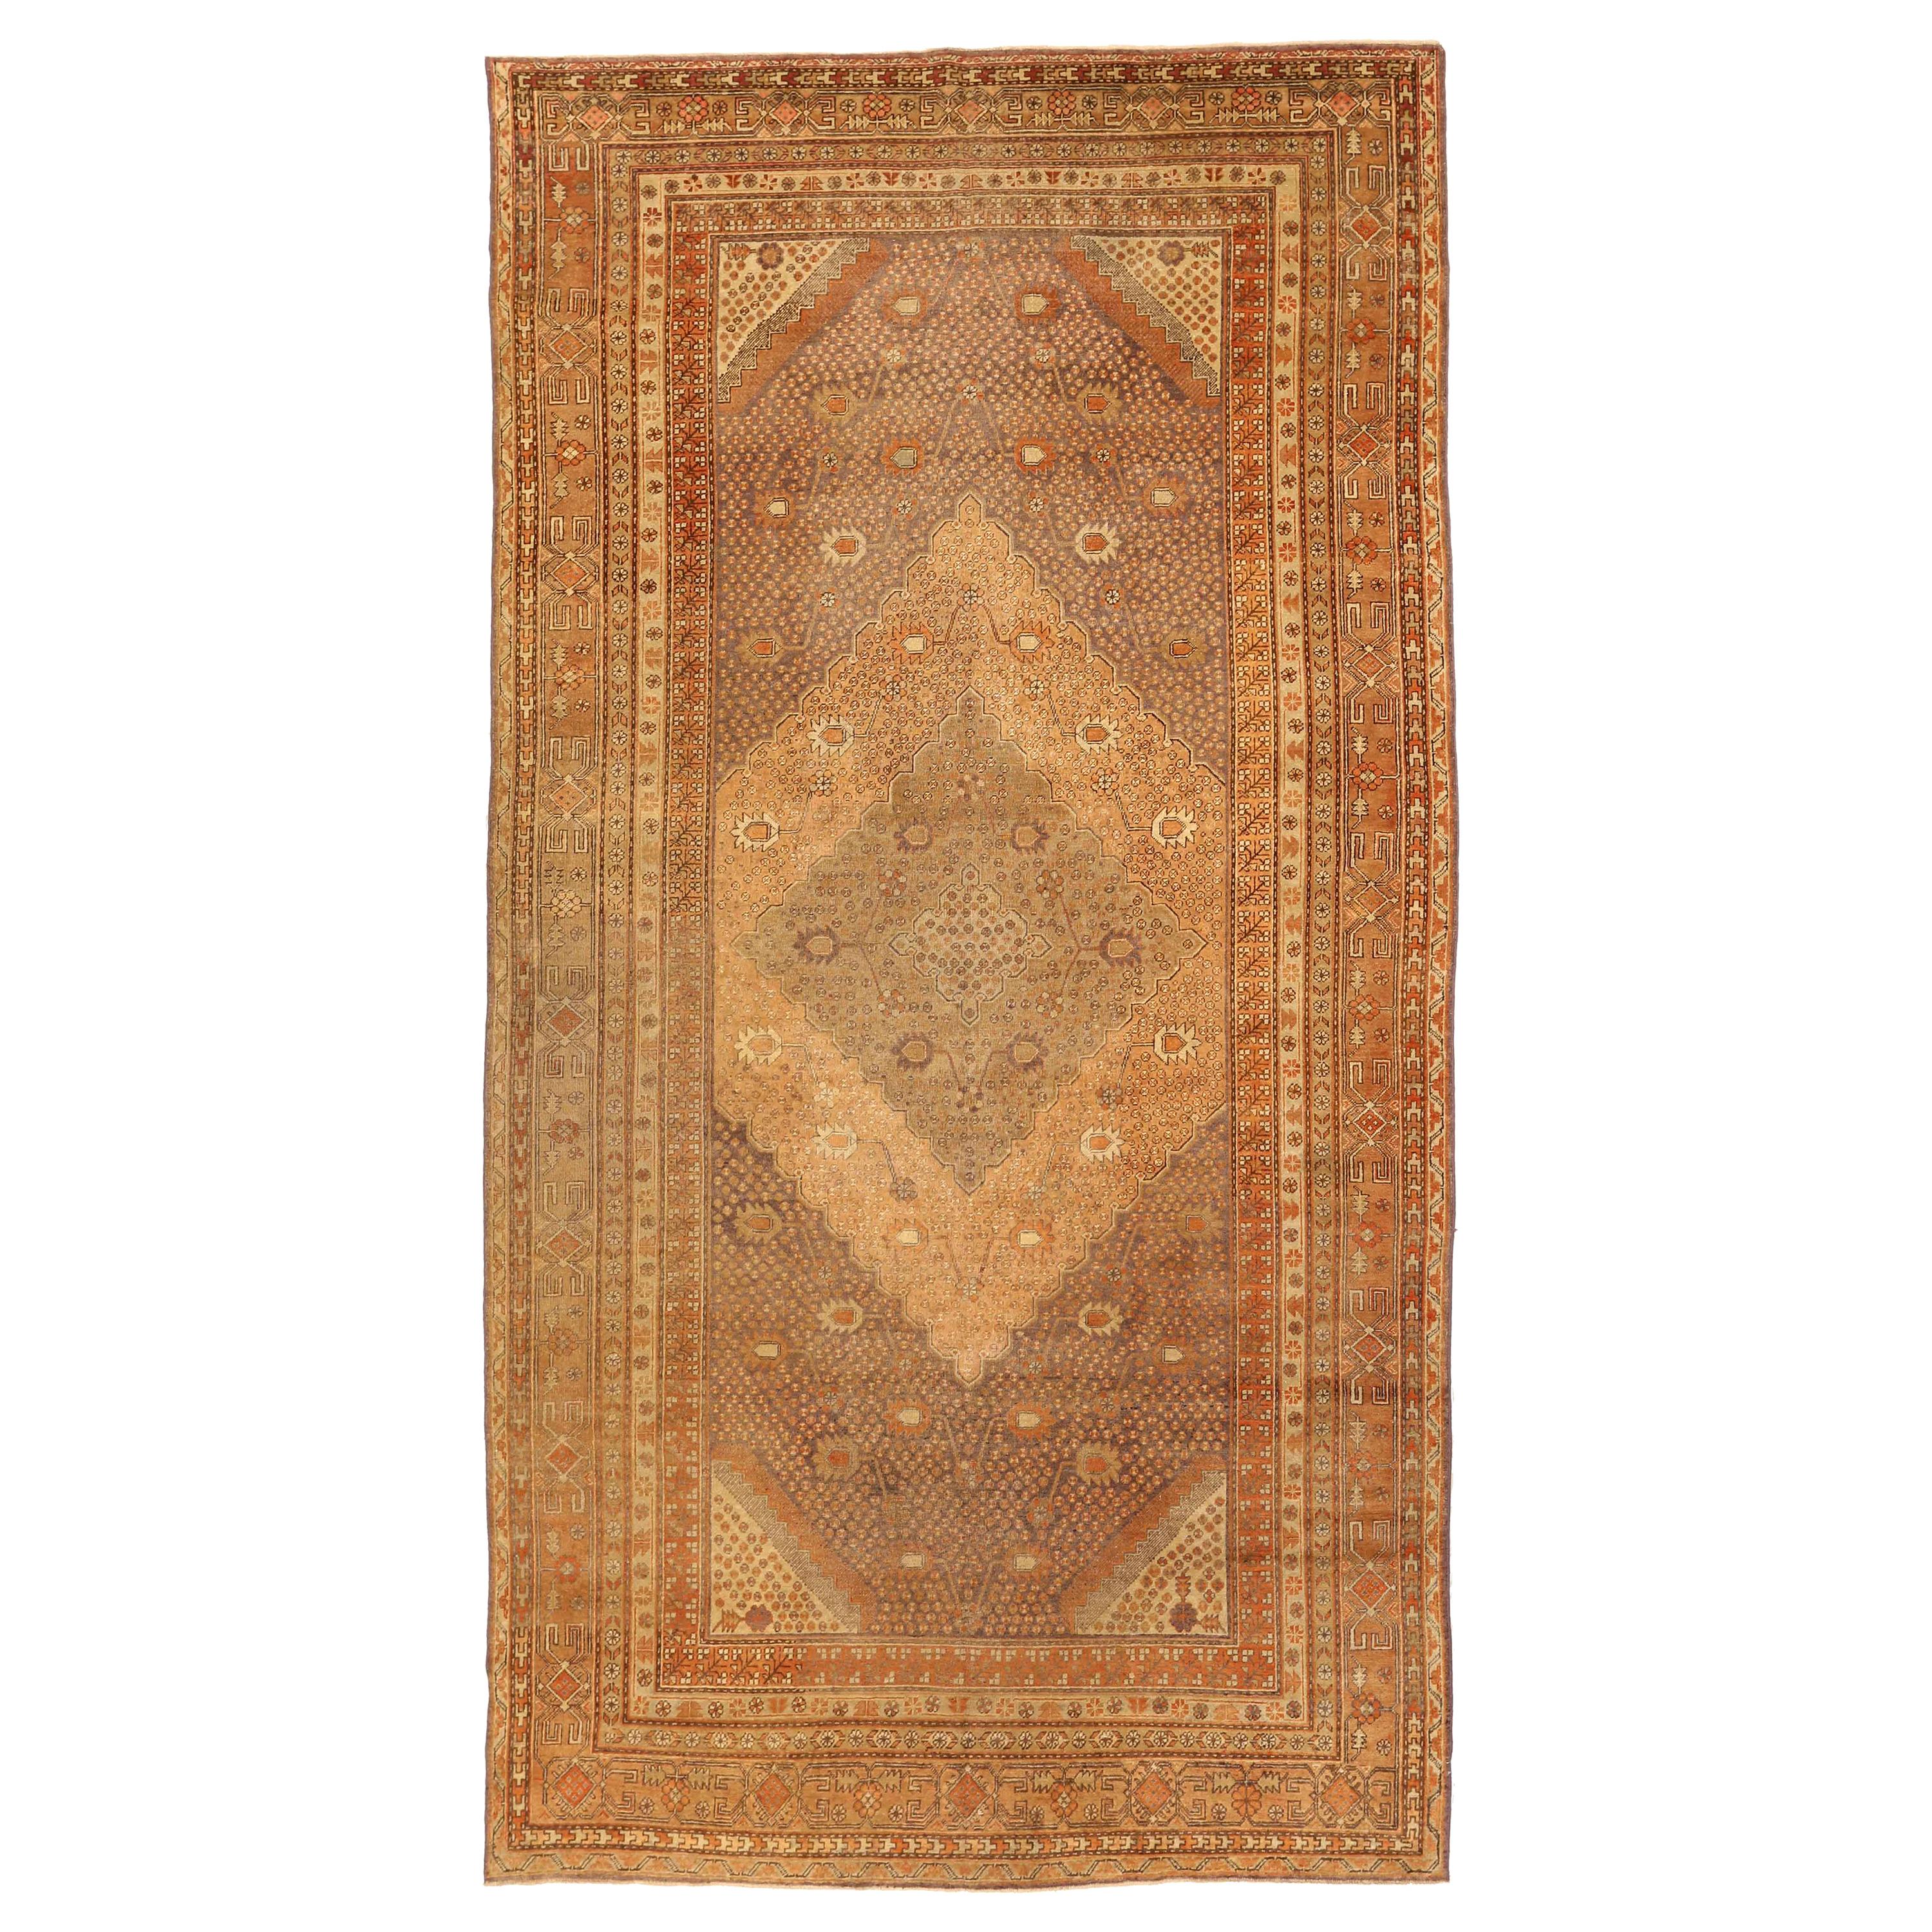 Antique Russian Khotan Rug with Brown & Ivory Diamond-Shaped Floral Details